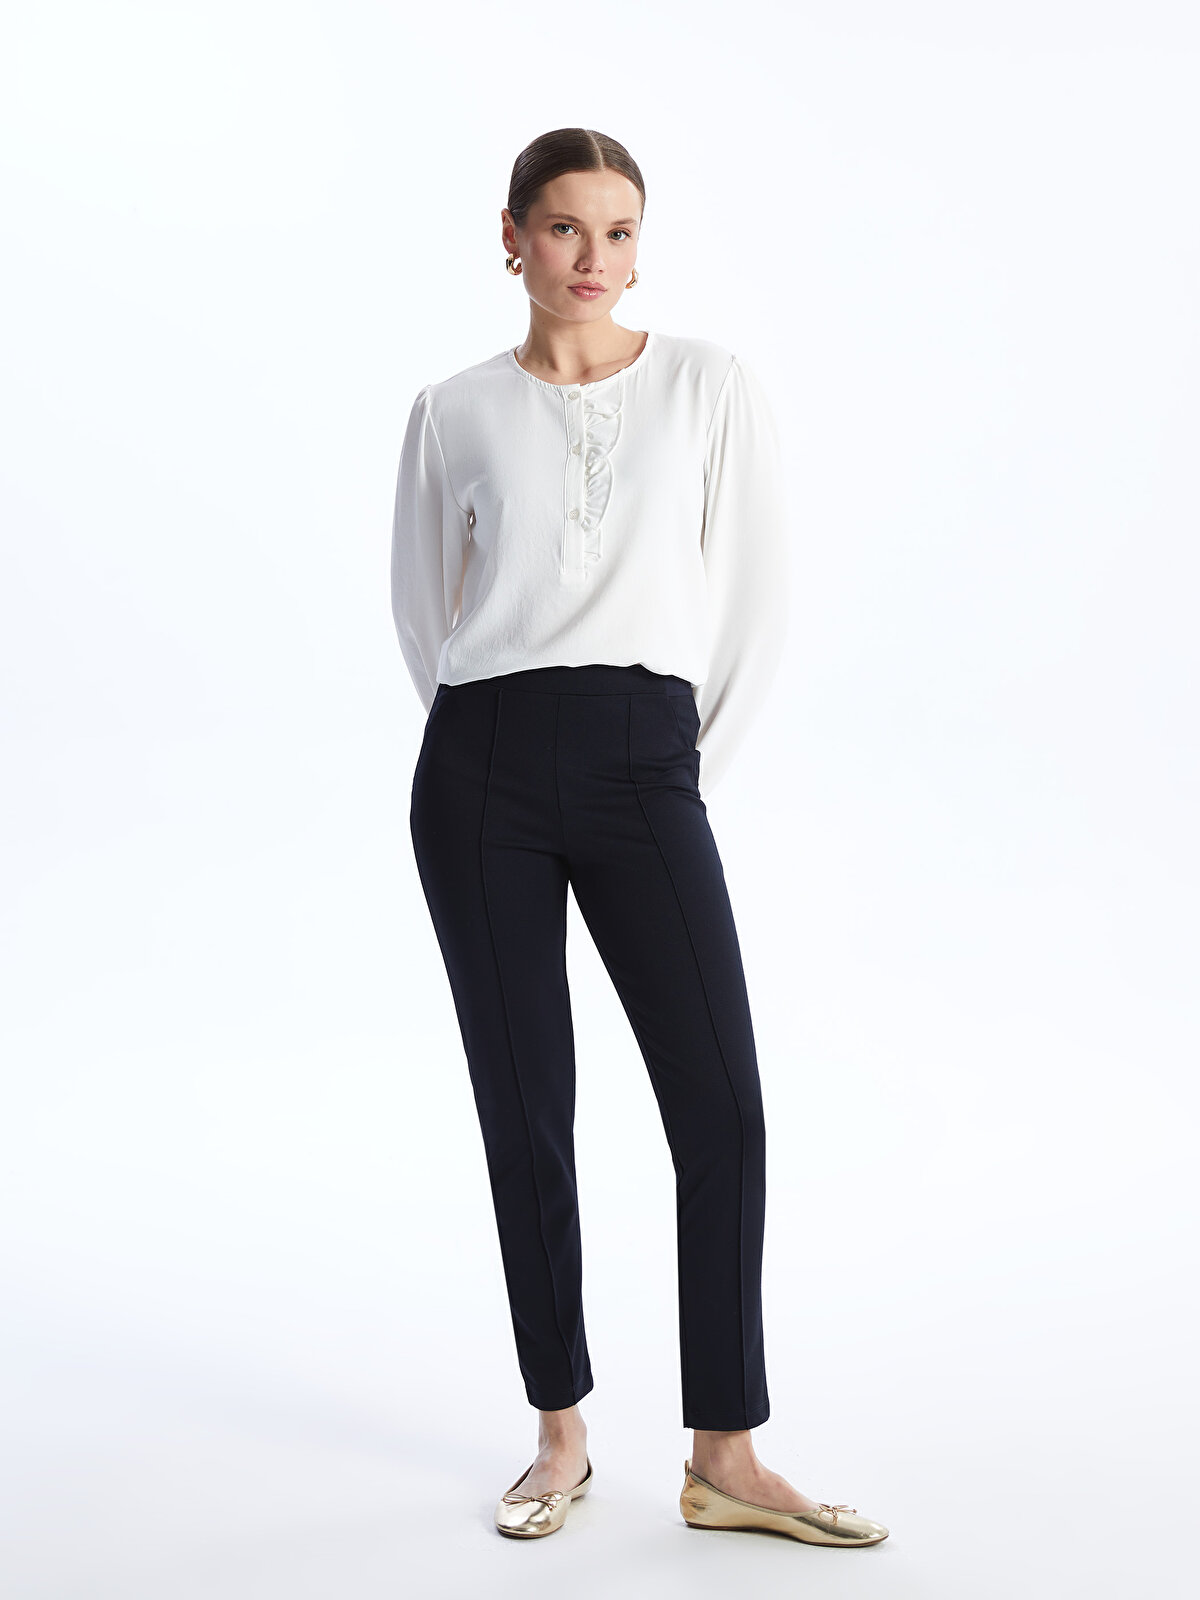 Women's Extra Tight Fit Straight Trousers with Elastic Waist -S40177Z8-E1J  - S40177Z8-E1J - LC Waikiki